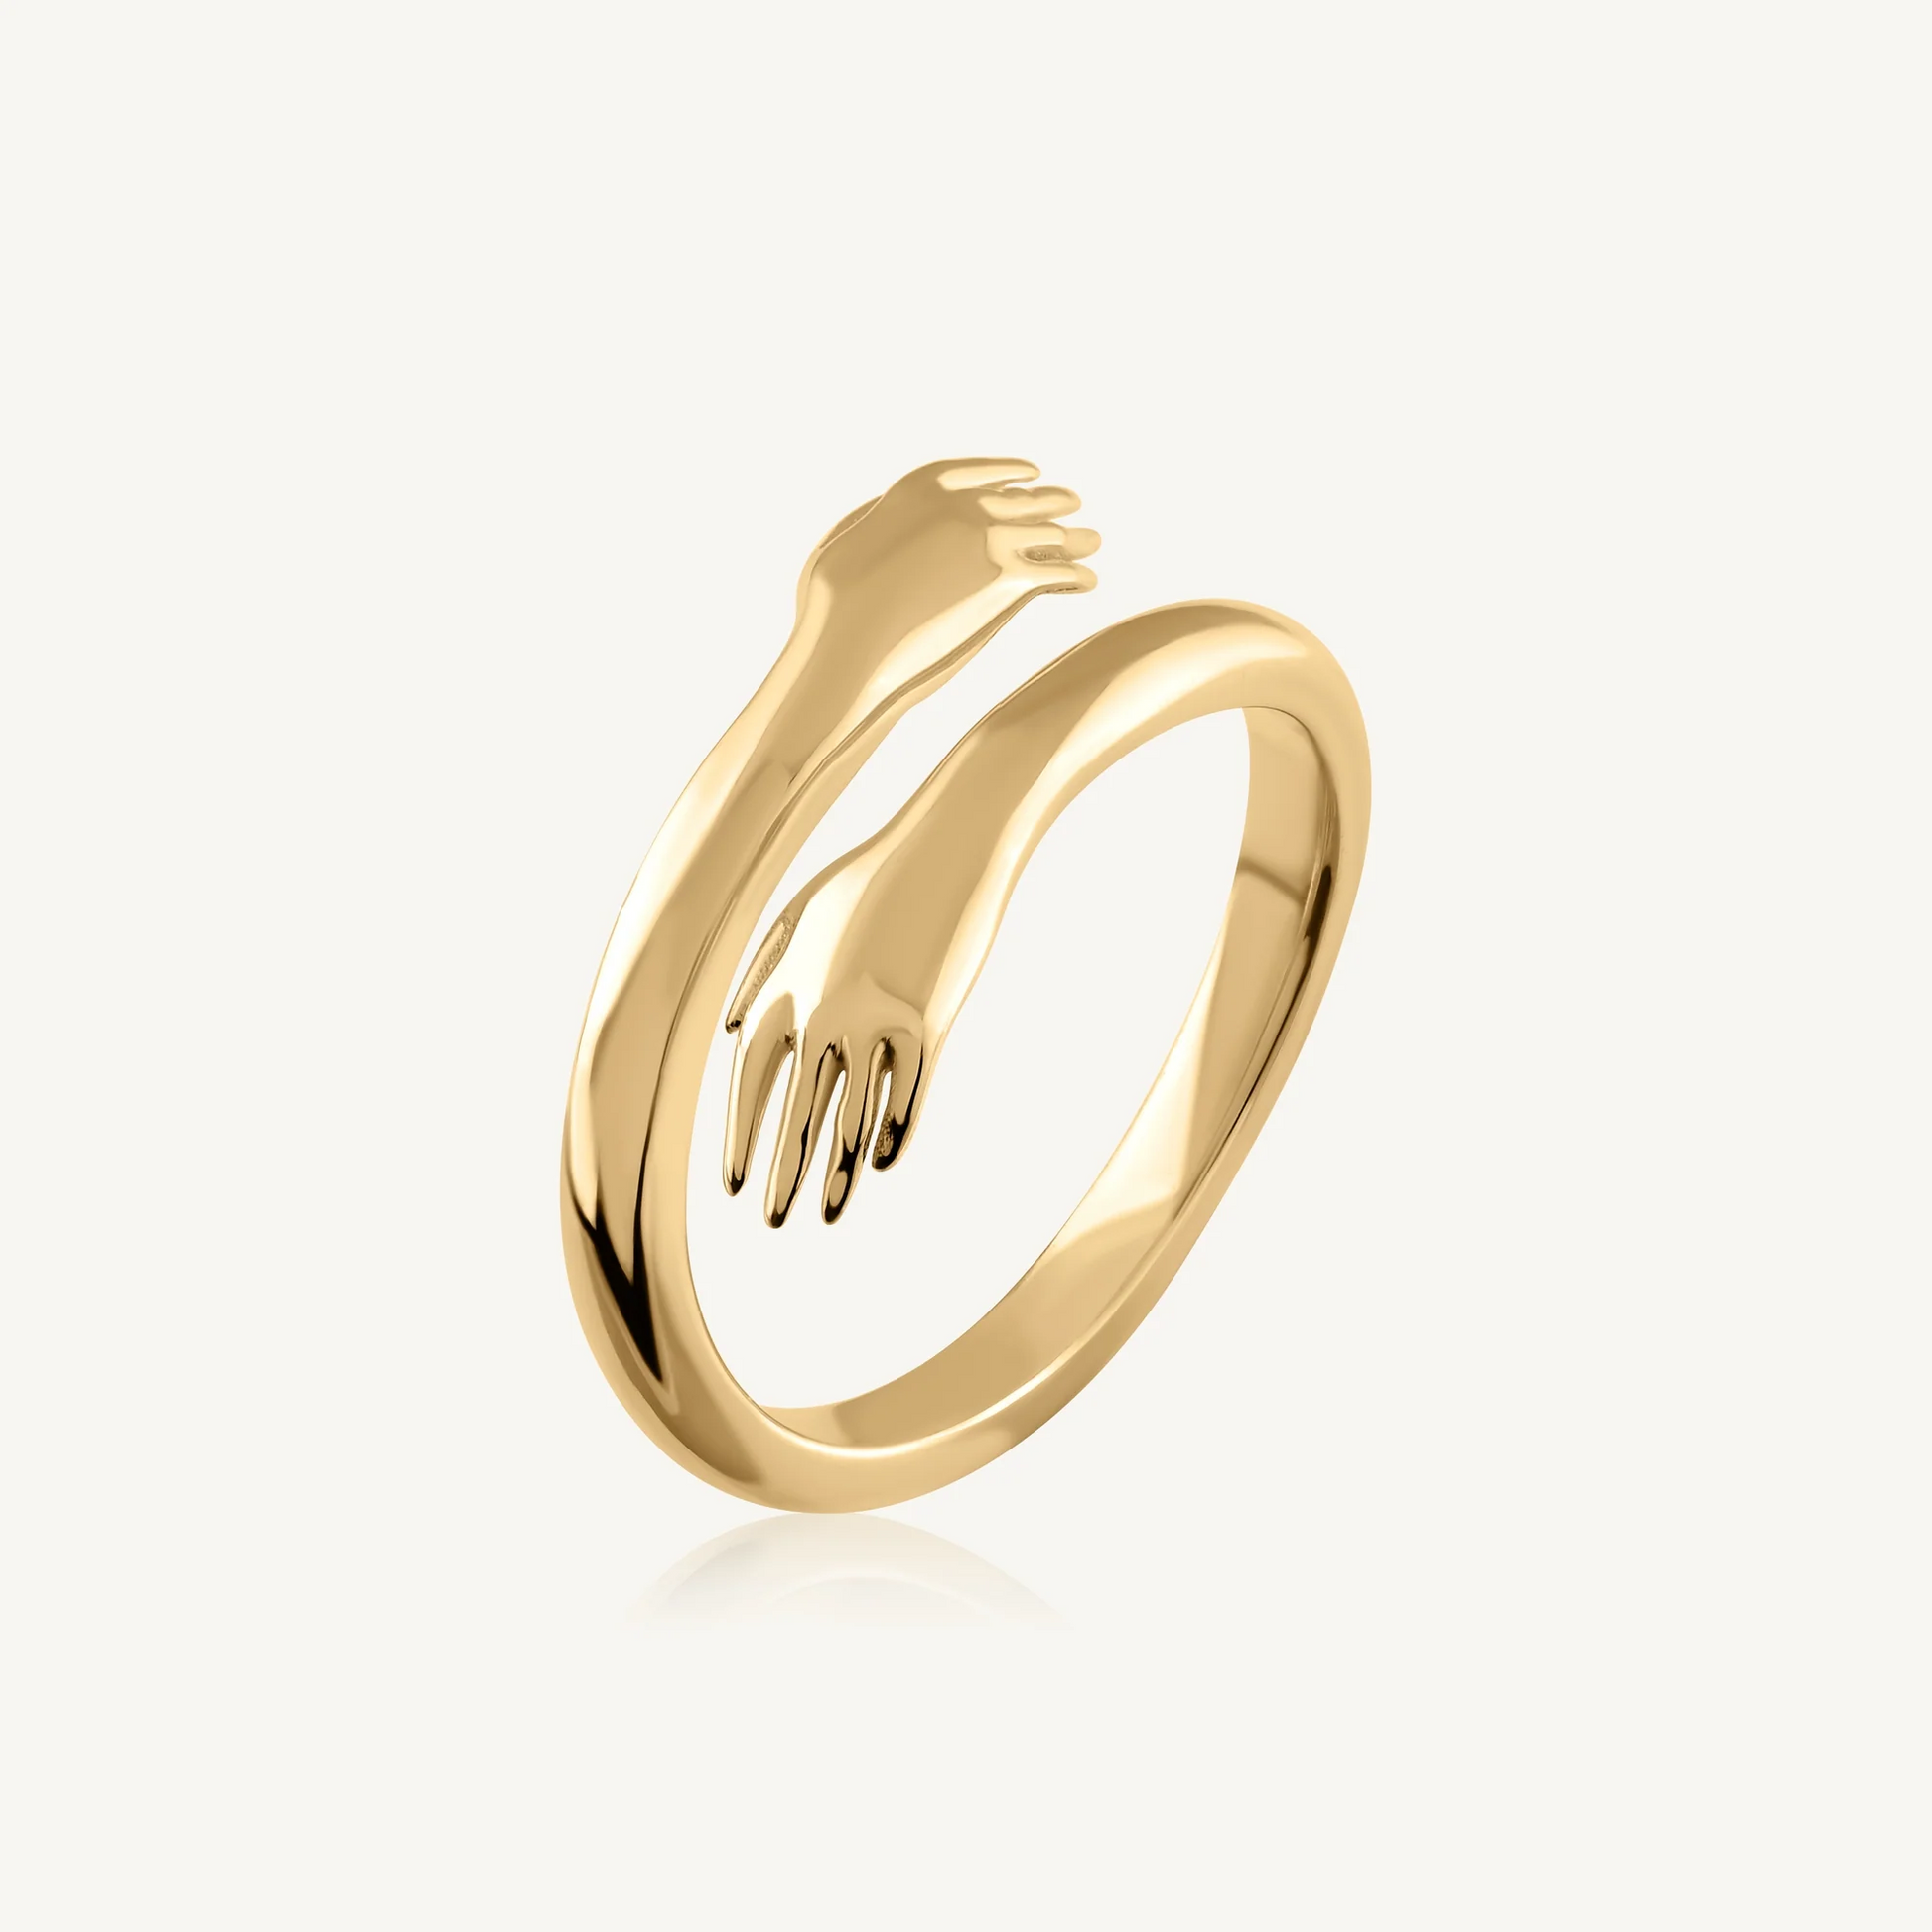 Riley Watson Jewellery Hug Ring (adjustable size) Gold gift listed on product page by Riley Watson | Riley Watson Jewellery